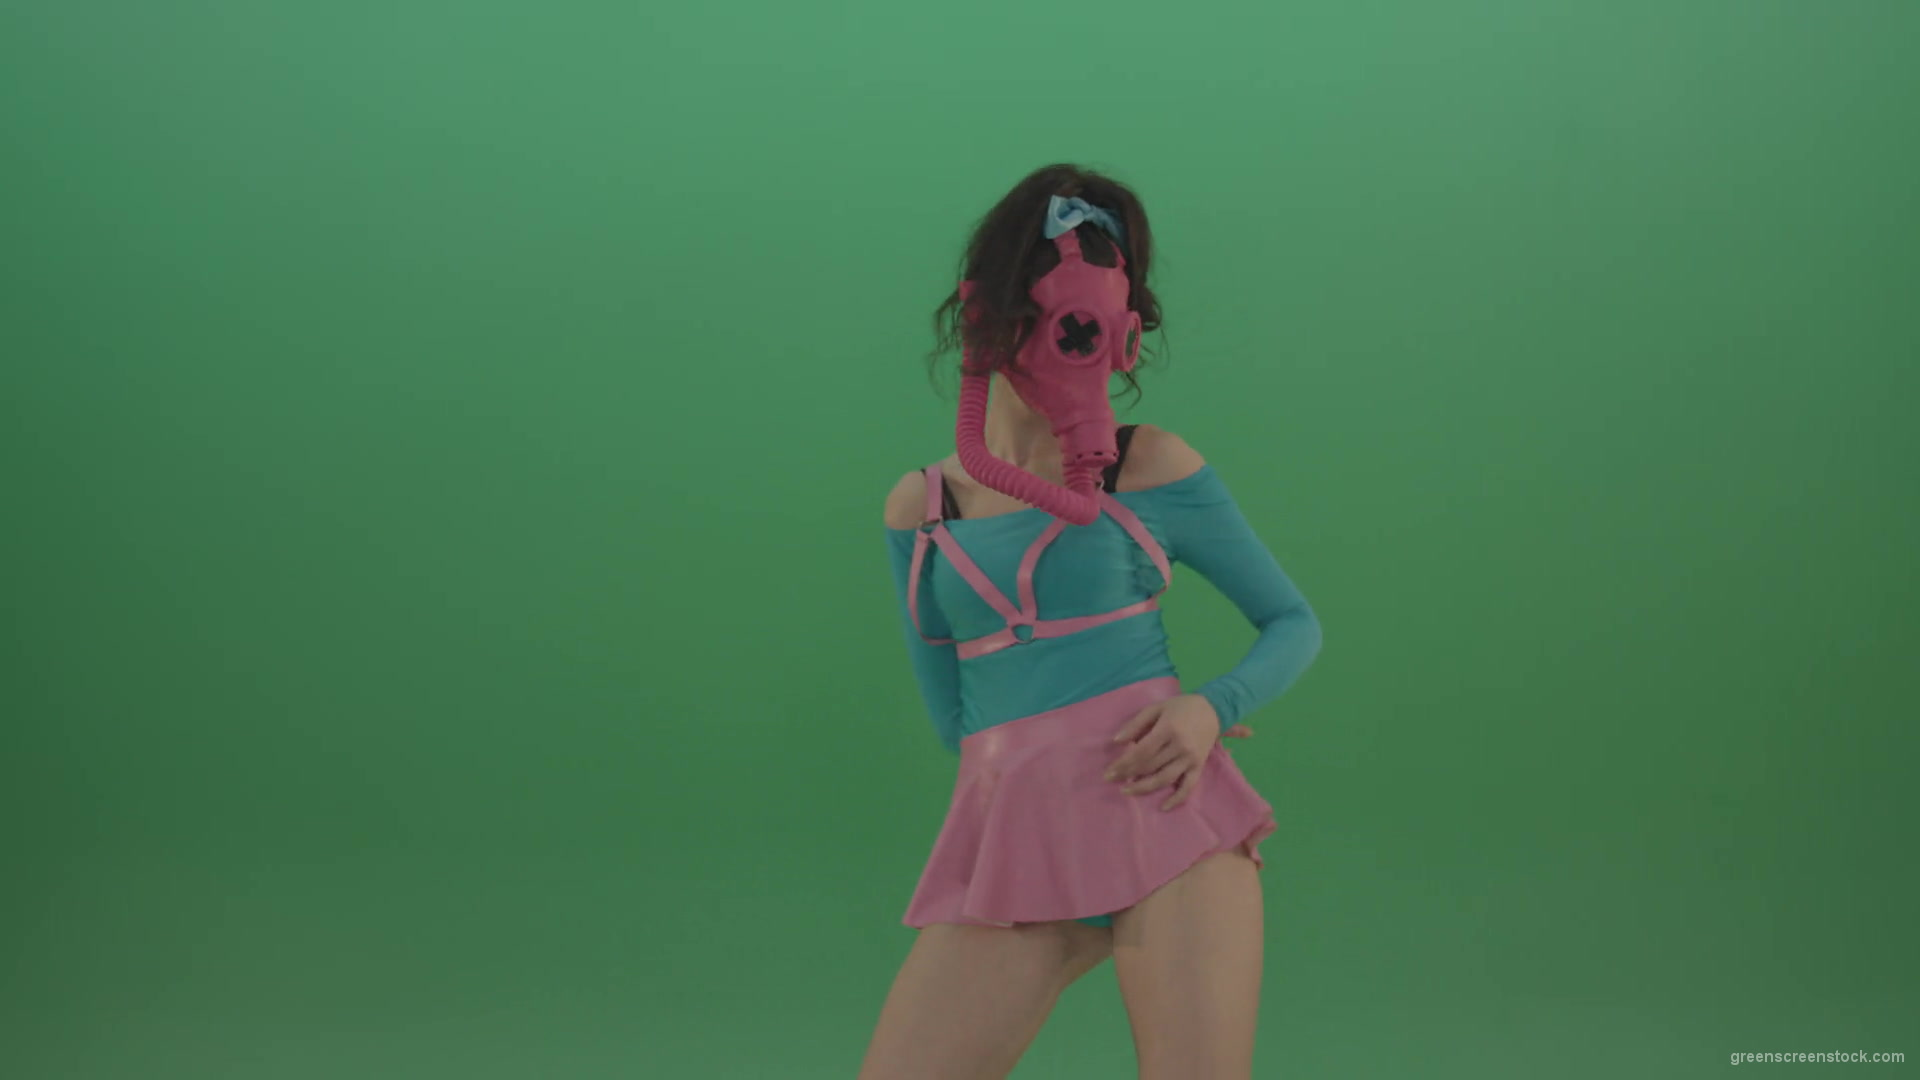 Go-Go-Dancing-Woman-in-Pink-Gas-Mask-sexy-moving-on-green-screen-4K-Video-Footage-1920_008 Green Screen Stock